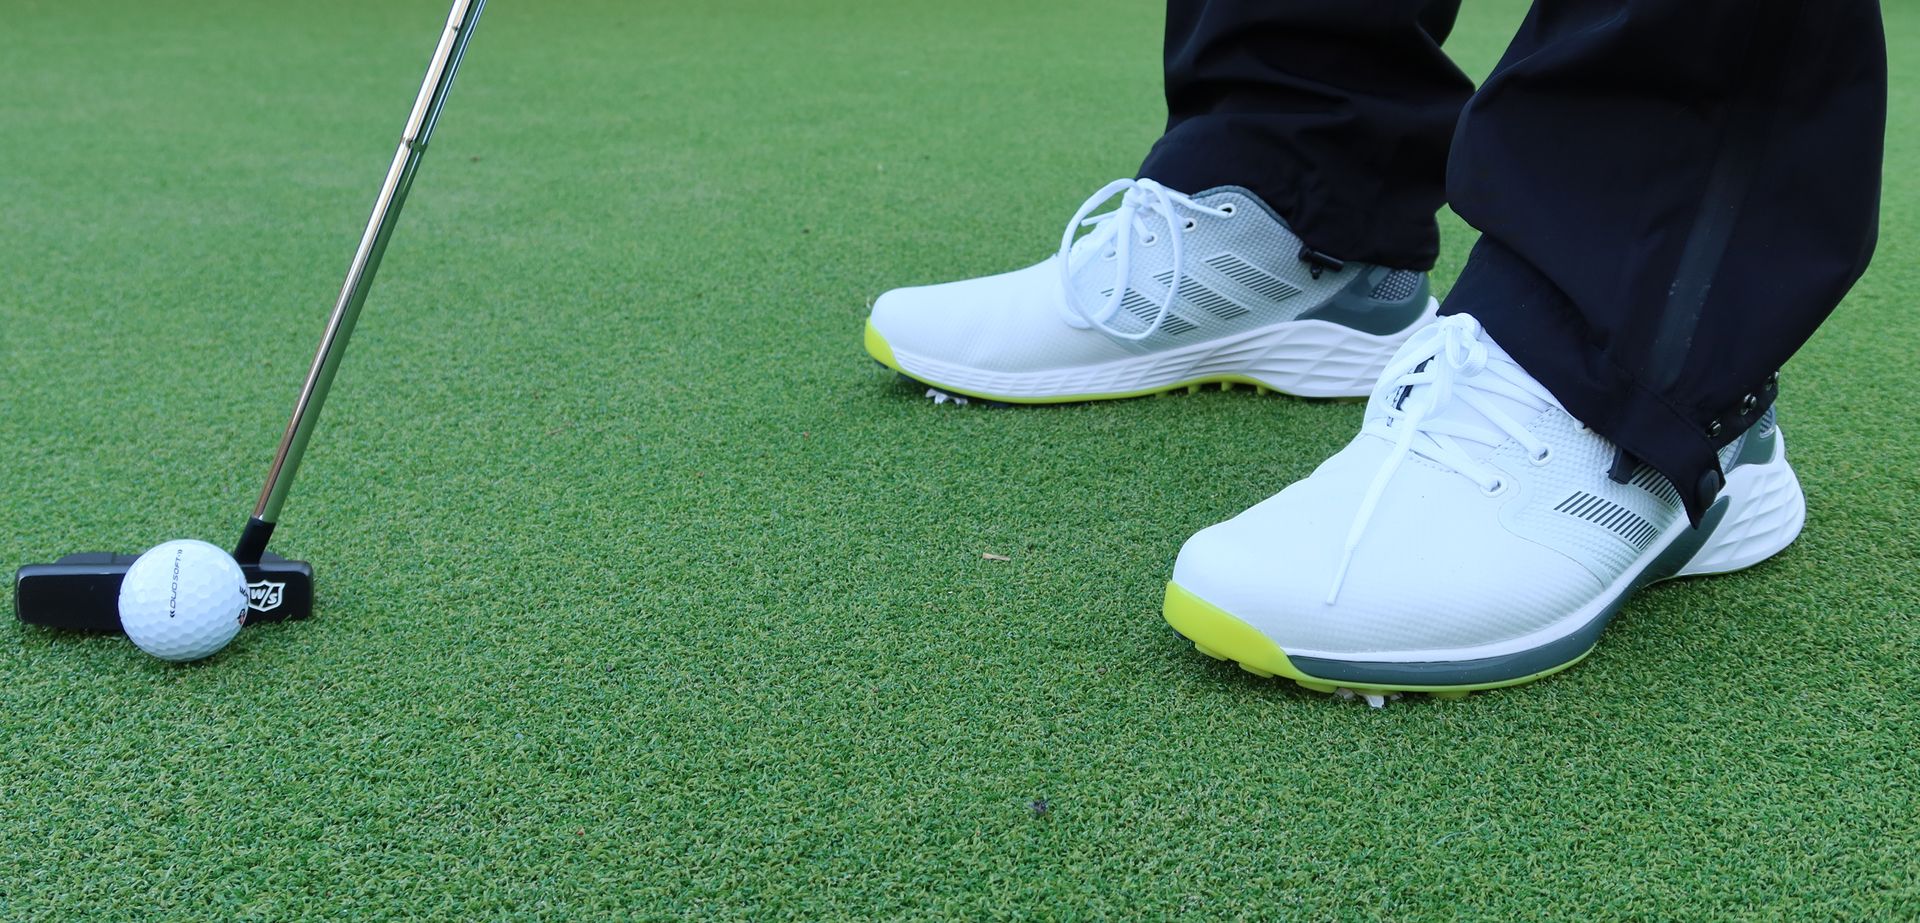 Golf shoes: spiked or spikeless? That is the question, and here are ...